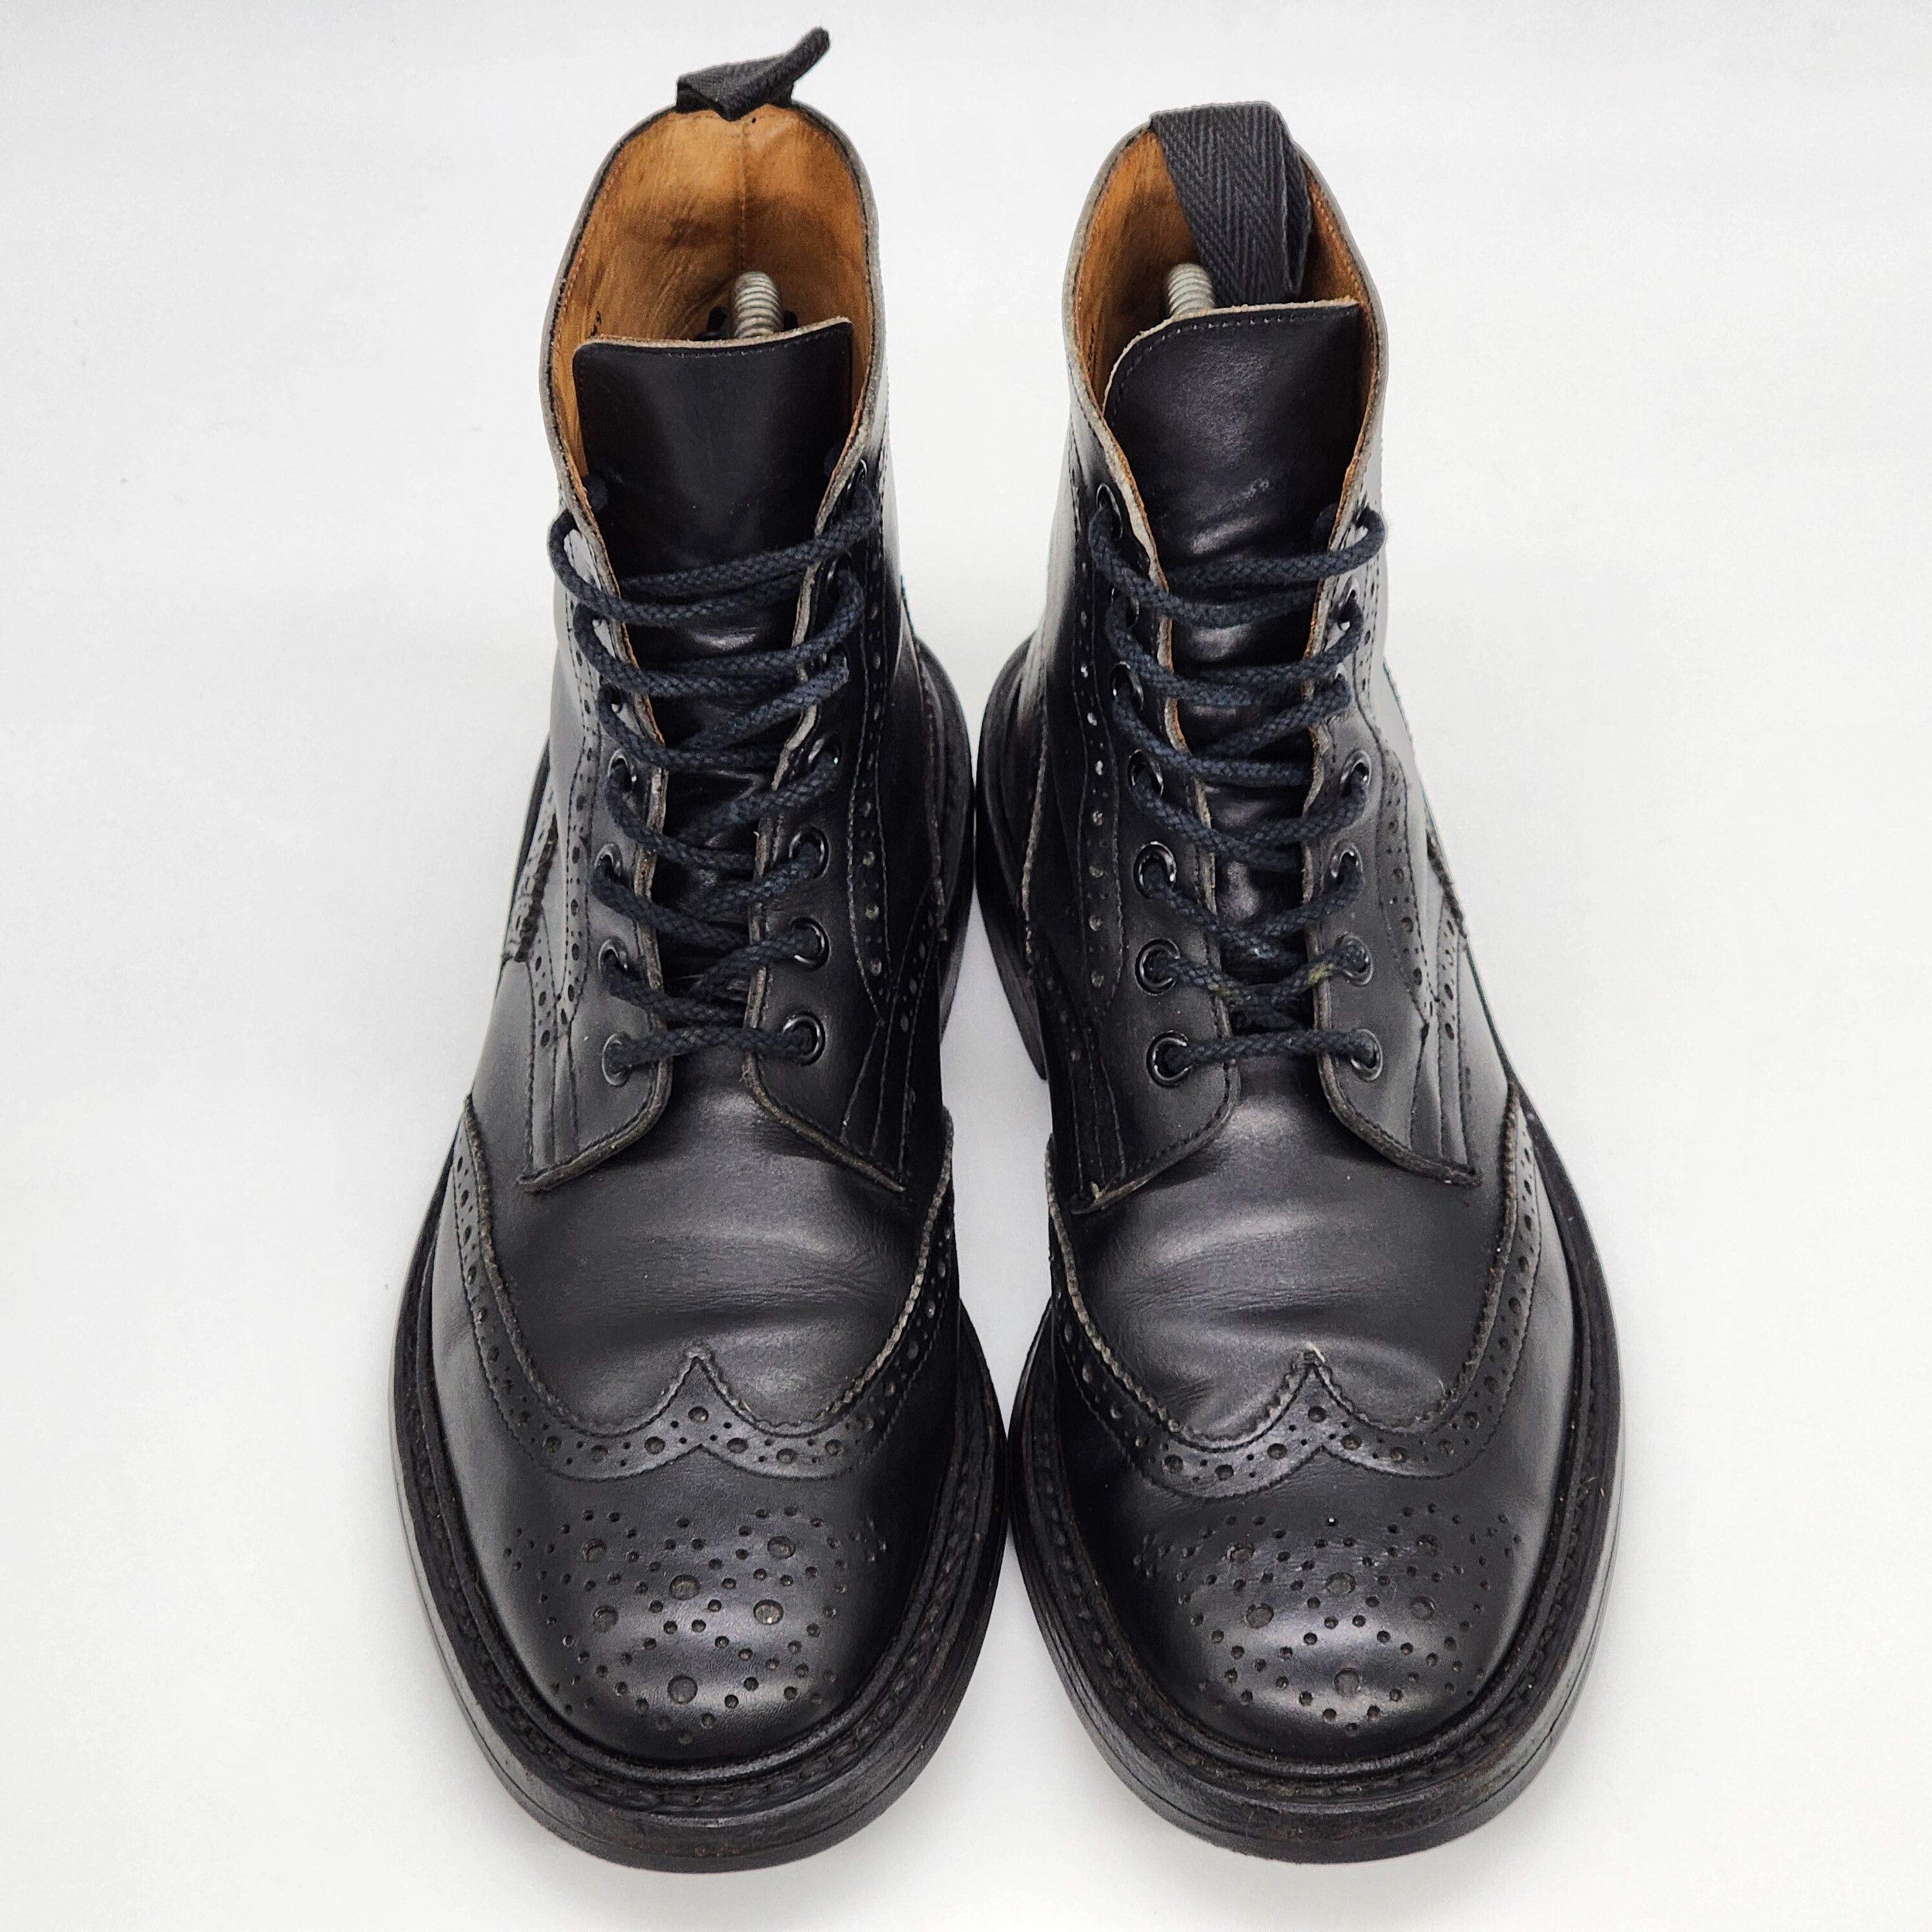 Trickers - Stow Boots - Black - 5